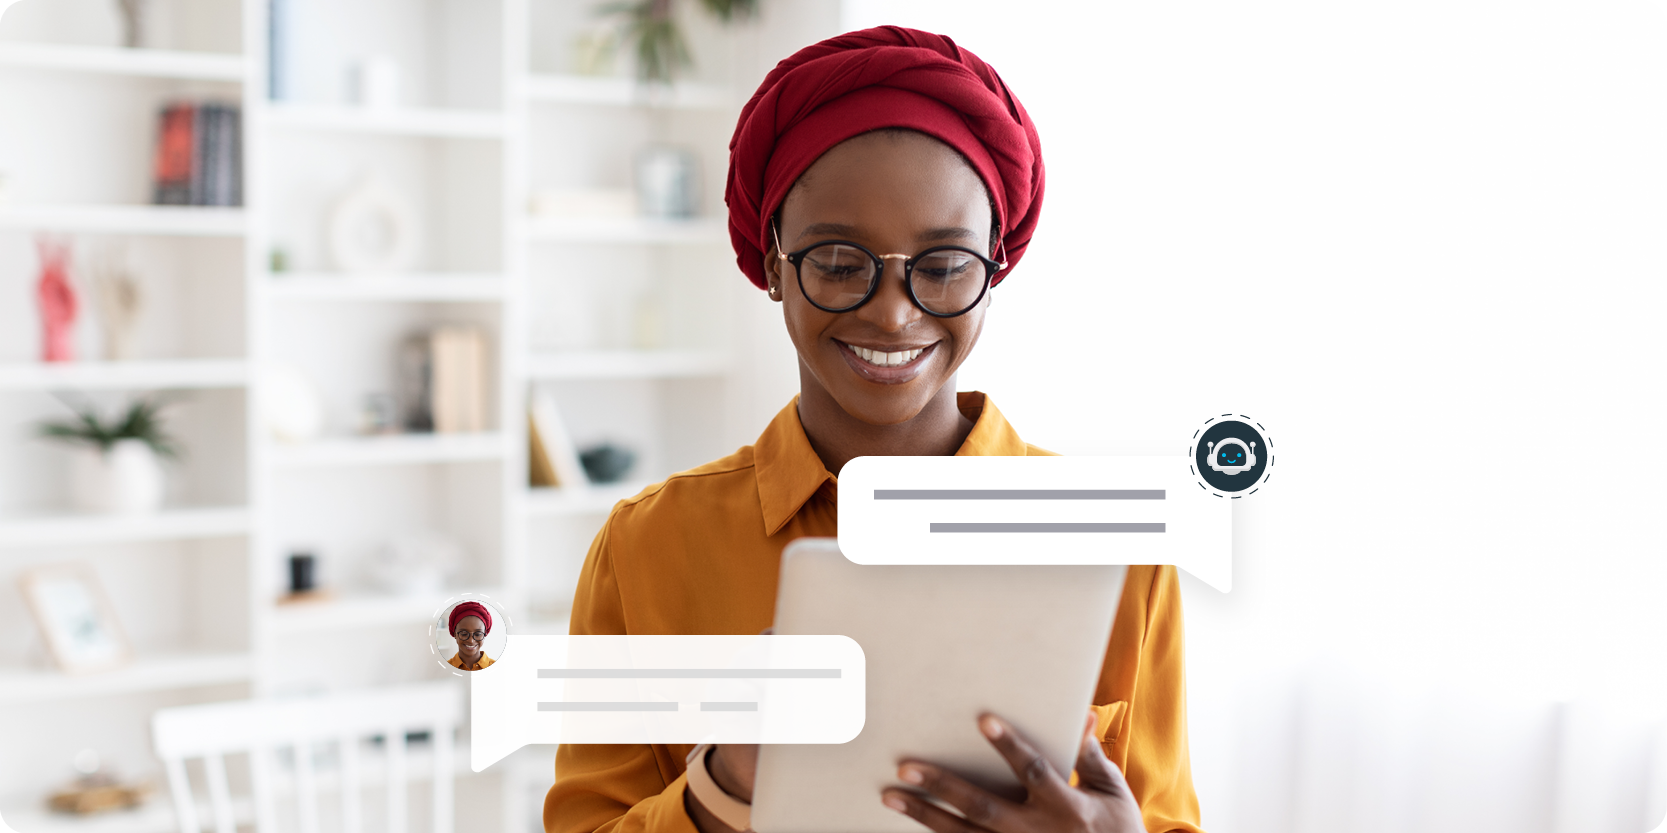 Usher in a new era of customer service with AI-powered chatbots